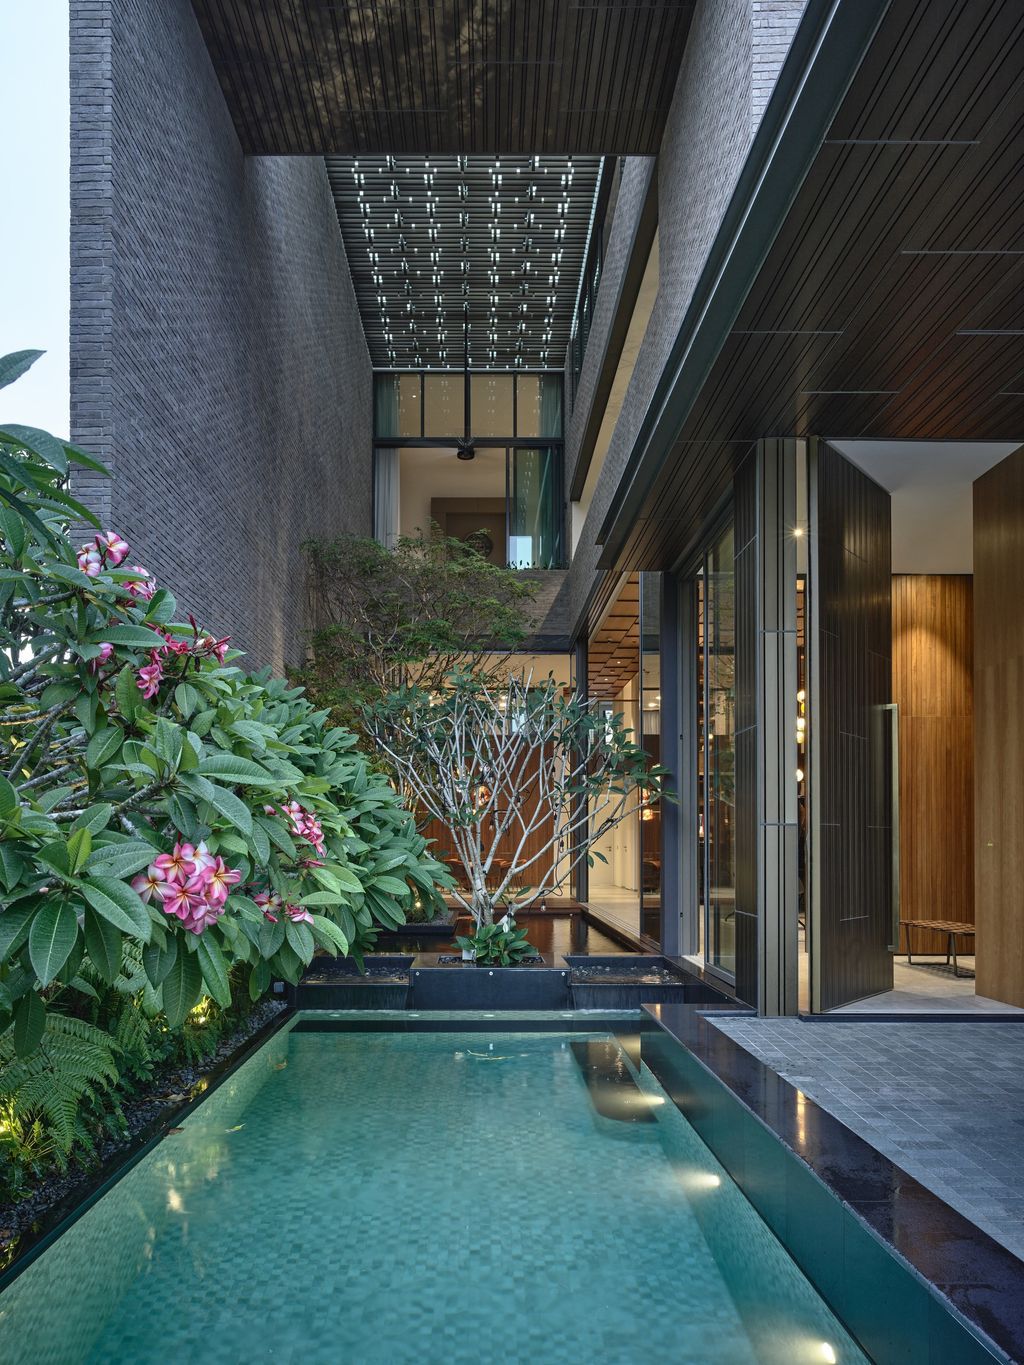 Vertical Oasis House Features Green Oasis Insides by HYLA Architects